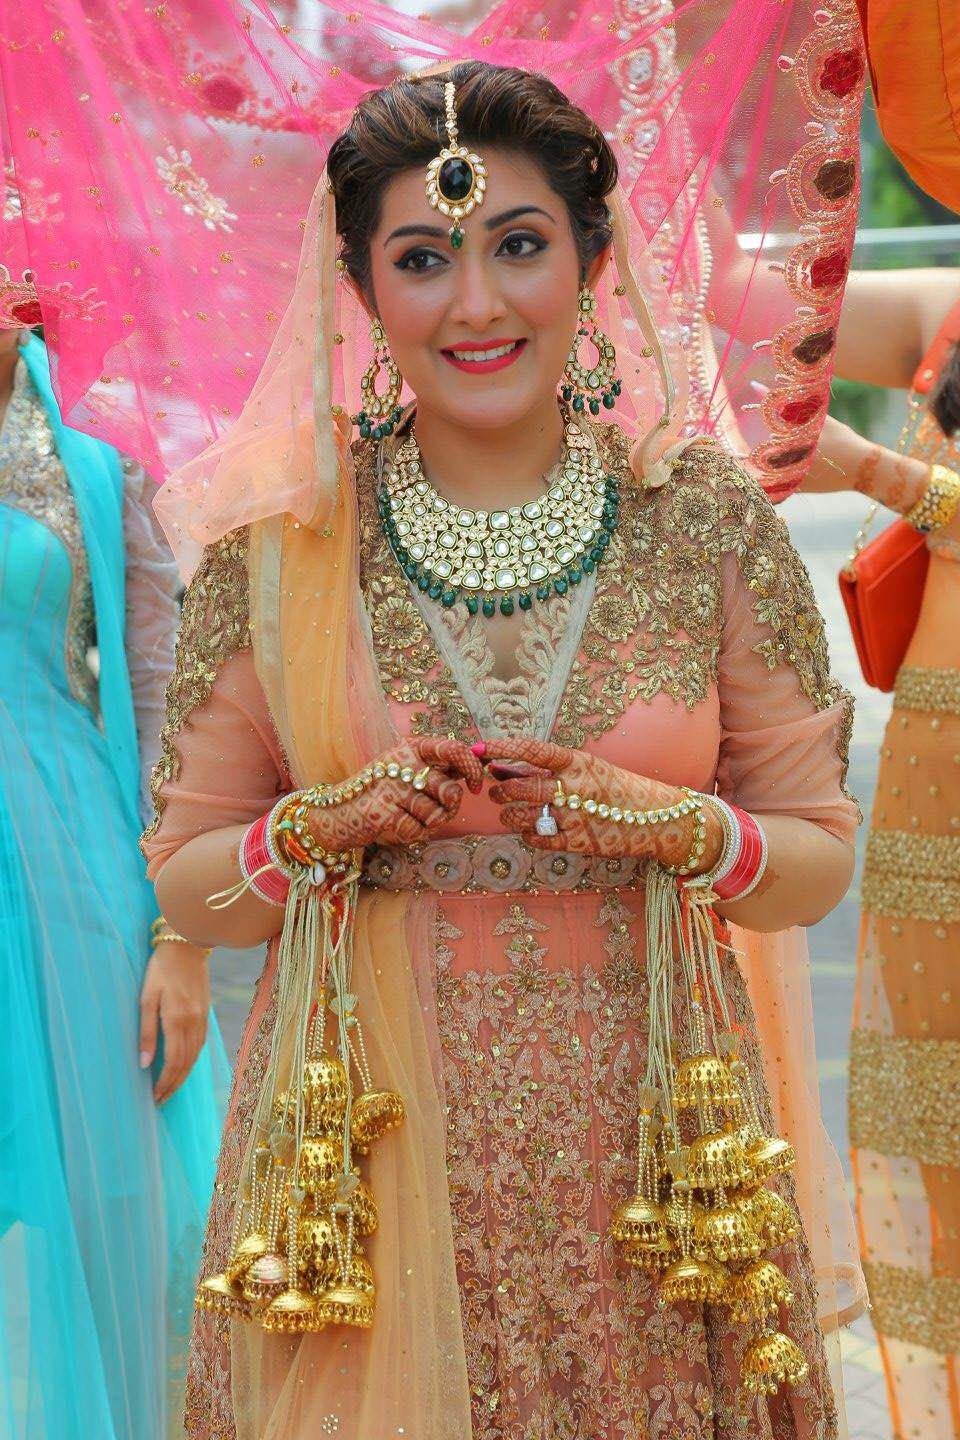 Photo of Peach Bride with Green Jewellery